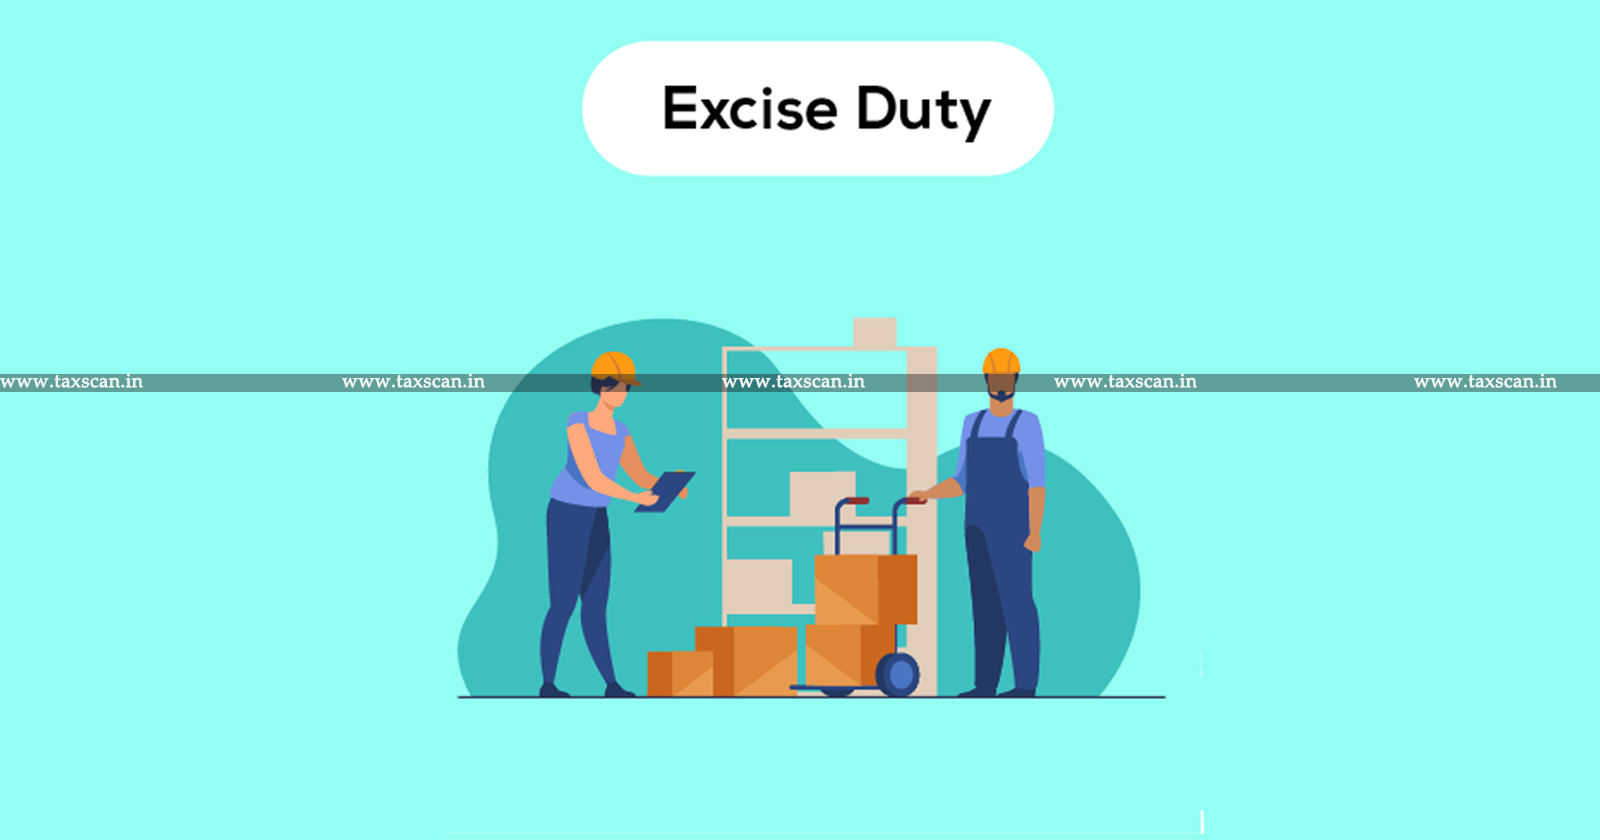 Levy of Excise Duty - Customs Duty - Goods manufactured outside India - Central Excise Act - CESTAT - taxscan